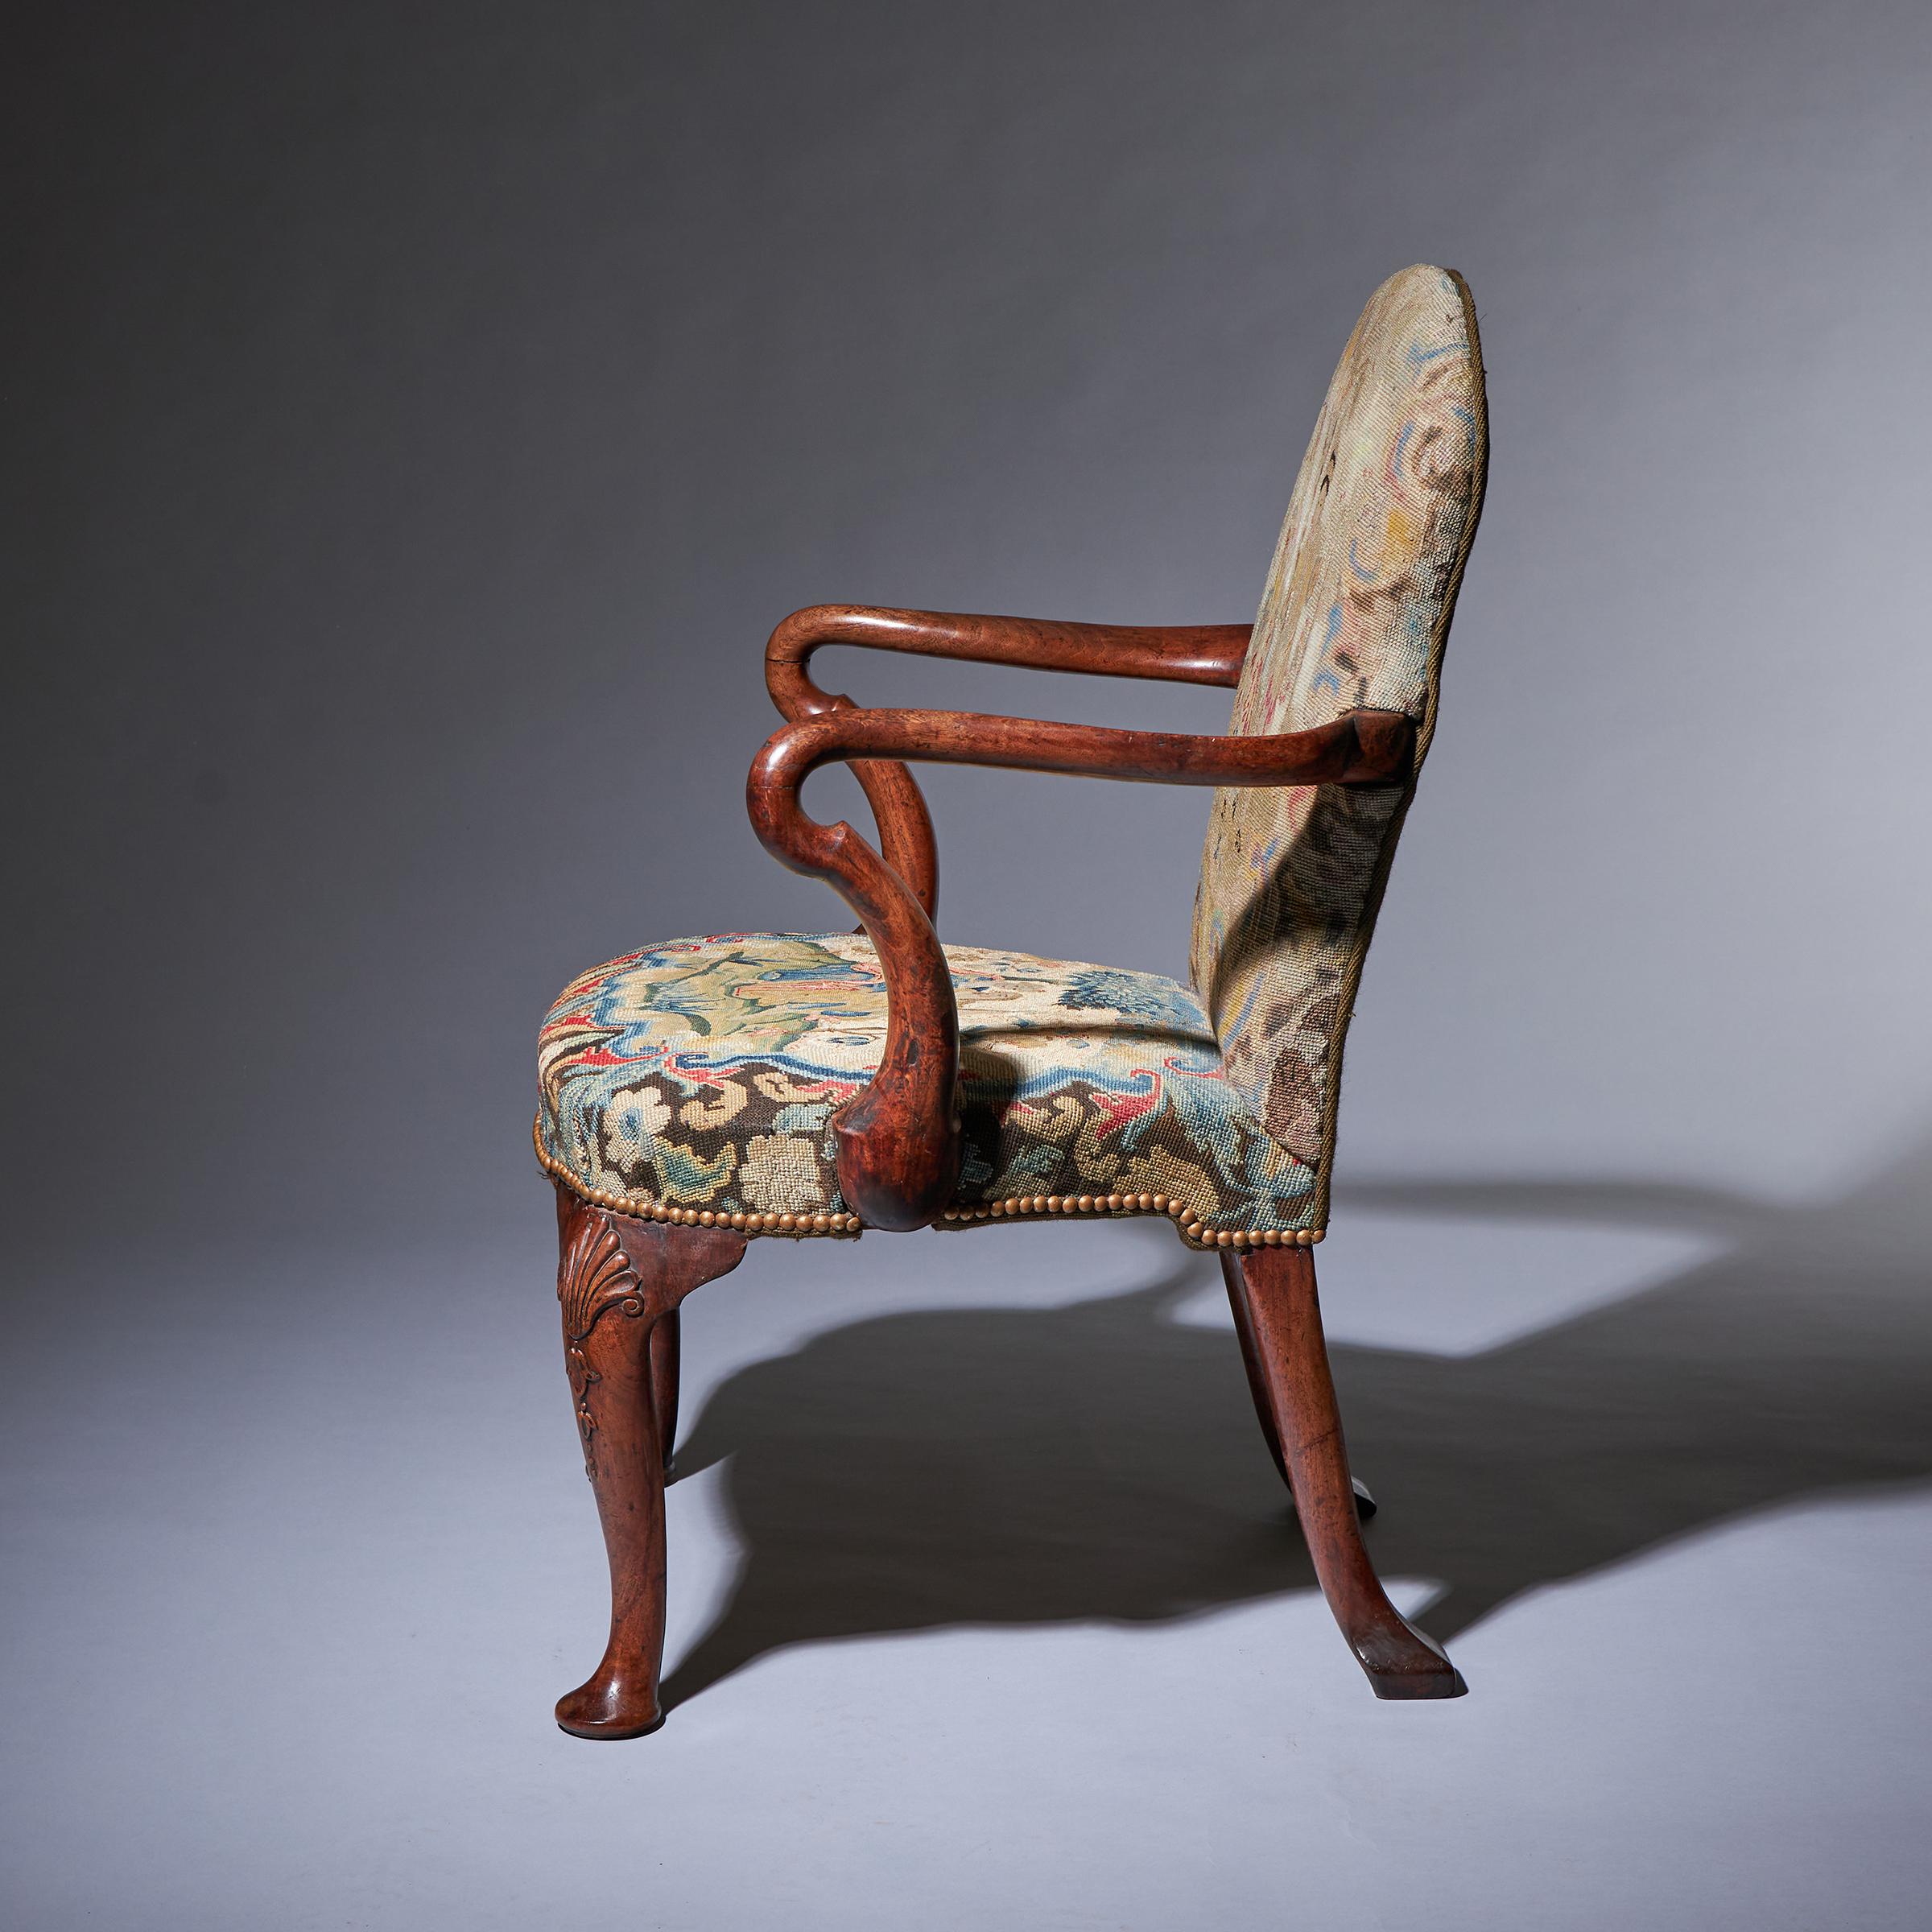 18th Century George I Walnut Shepherds Crook Armchair with Period Needlework In Good Condition For Sale In Oxfordshire, United Kingdom